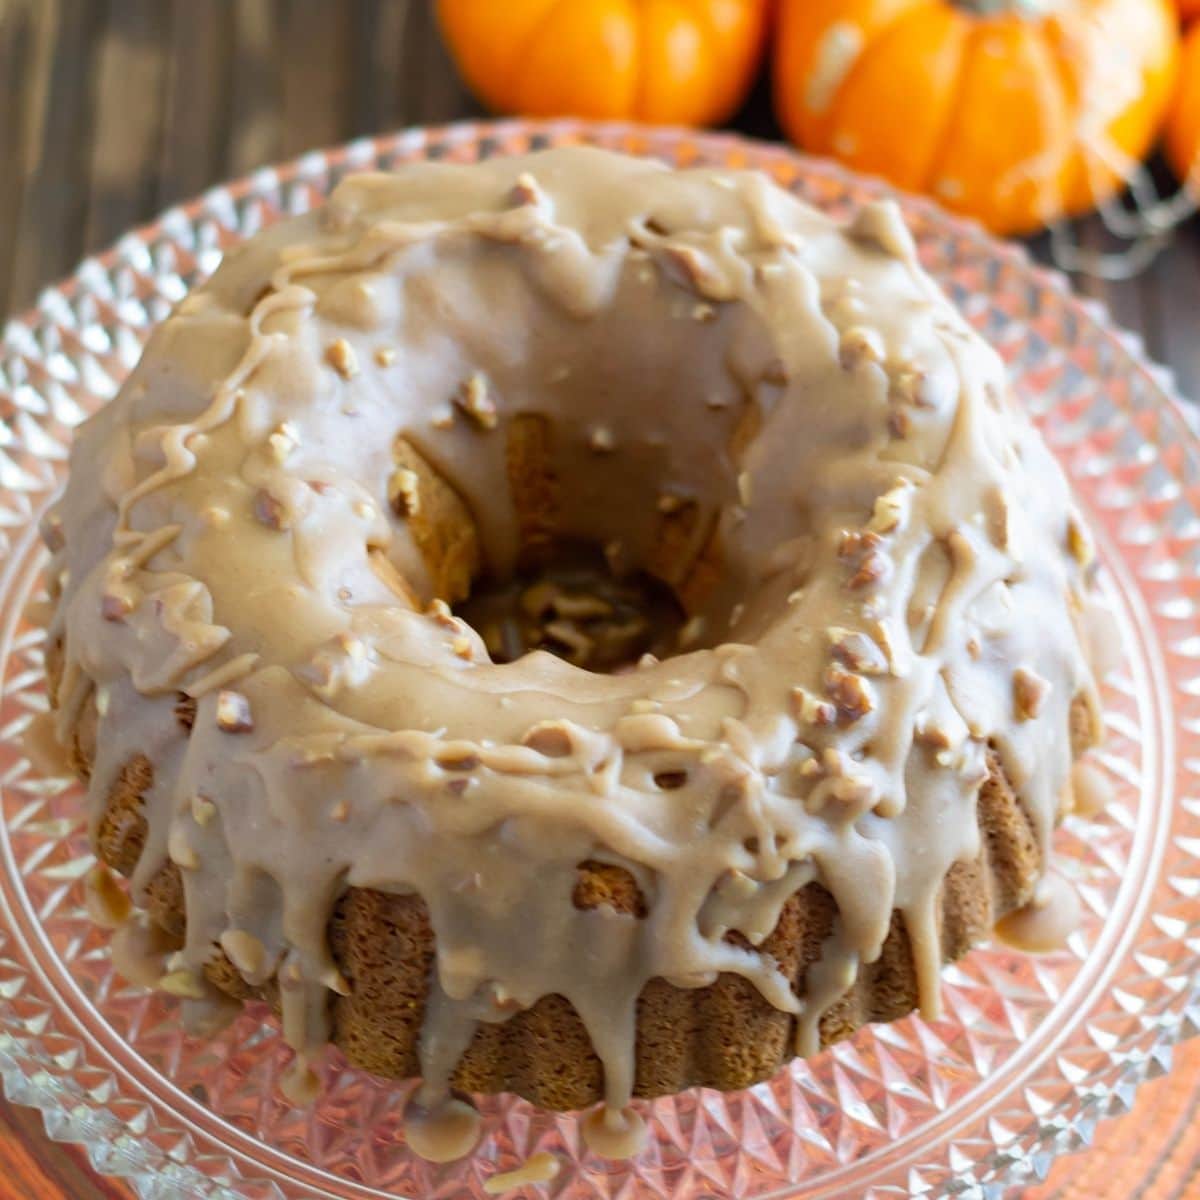 Overhead view of Pumpkin Pecan Bundt cake served on a vintage glass cake stand.